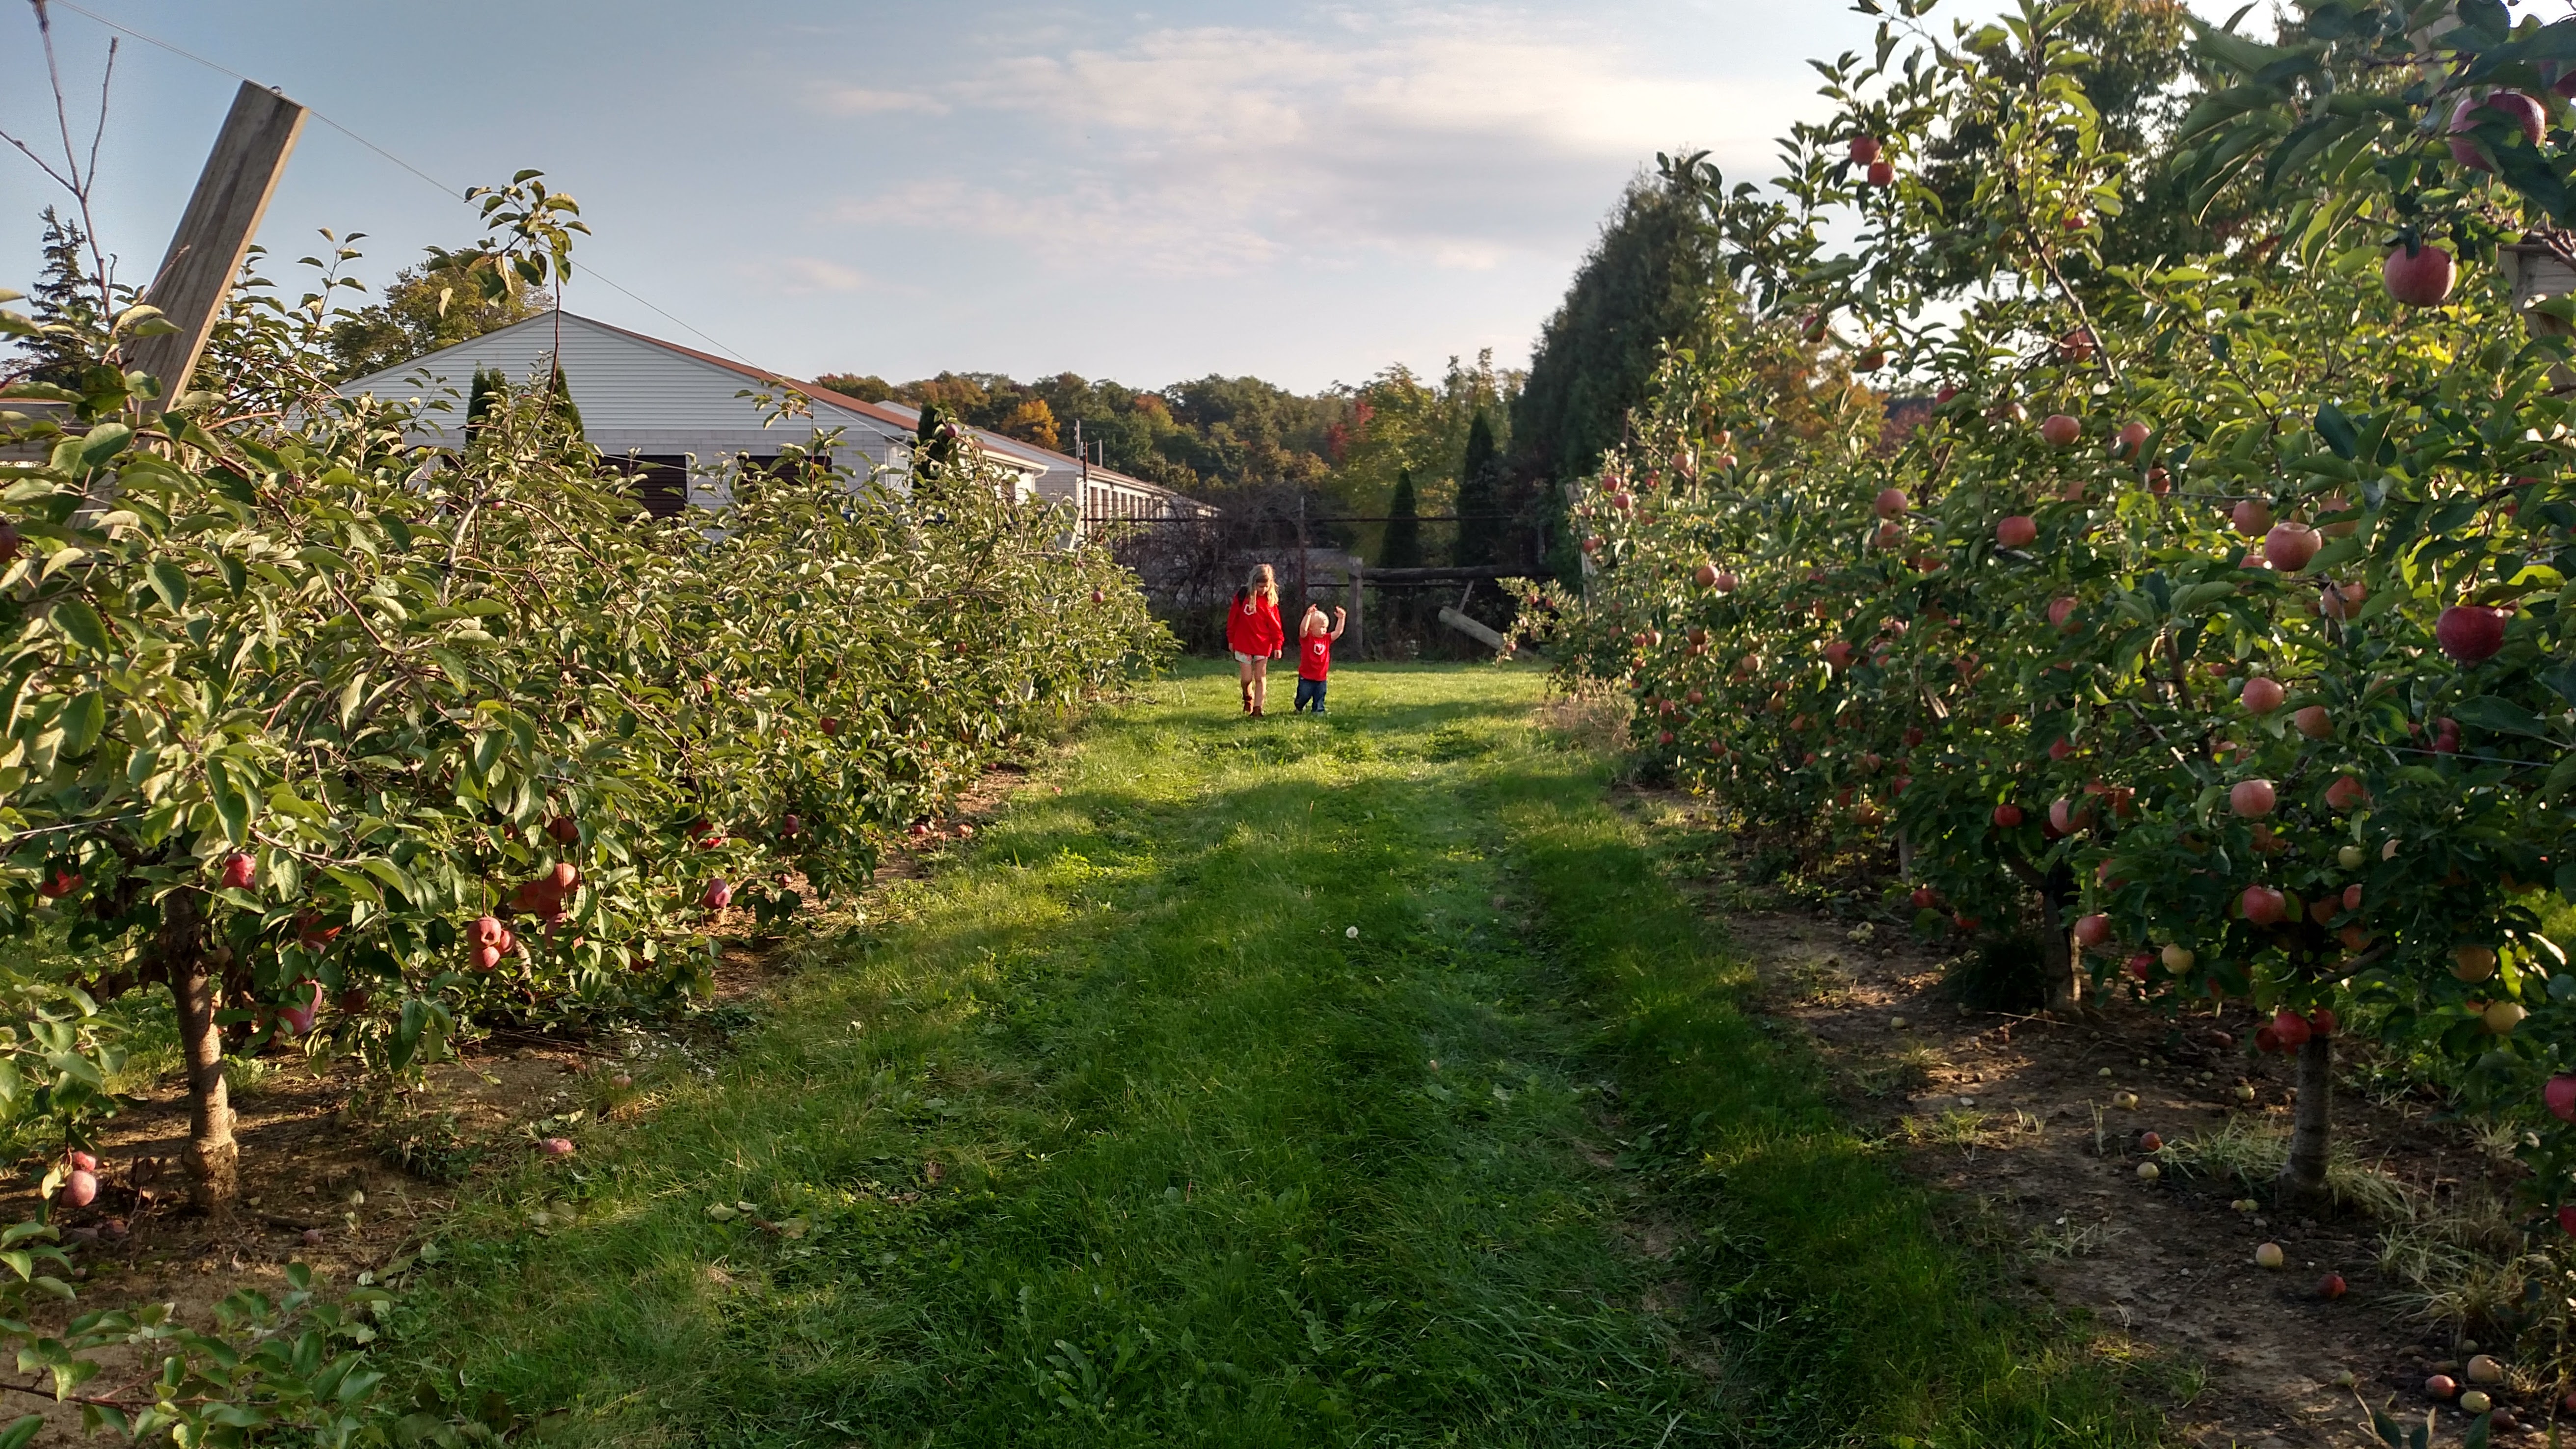 We offer about 10 varieties of apples to pick-your-own.